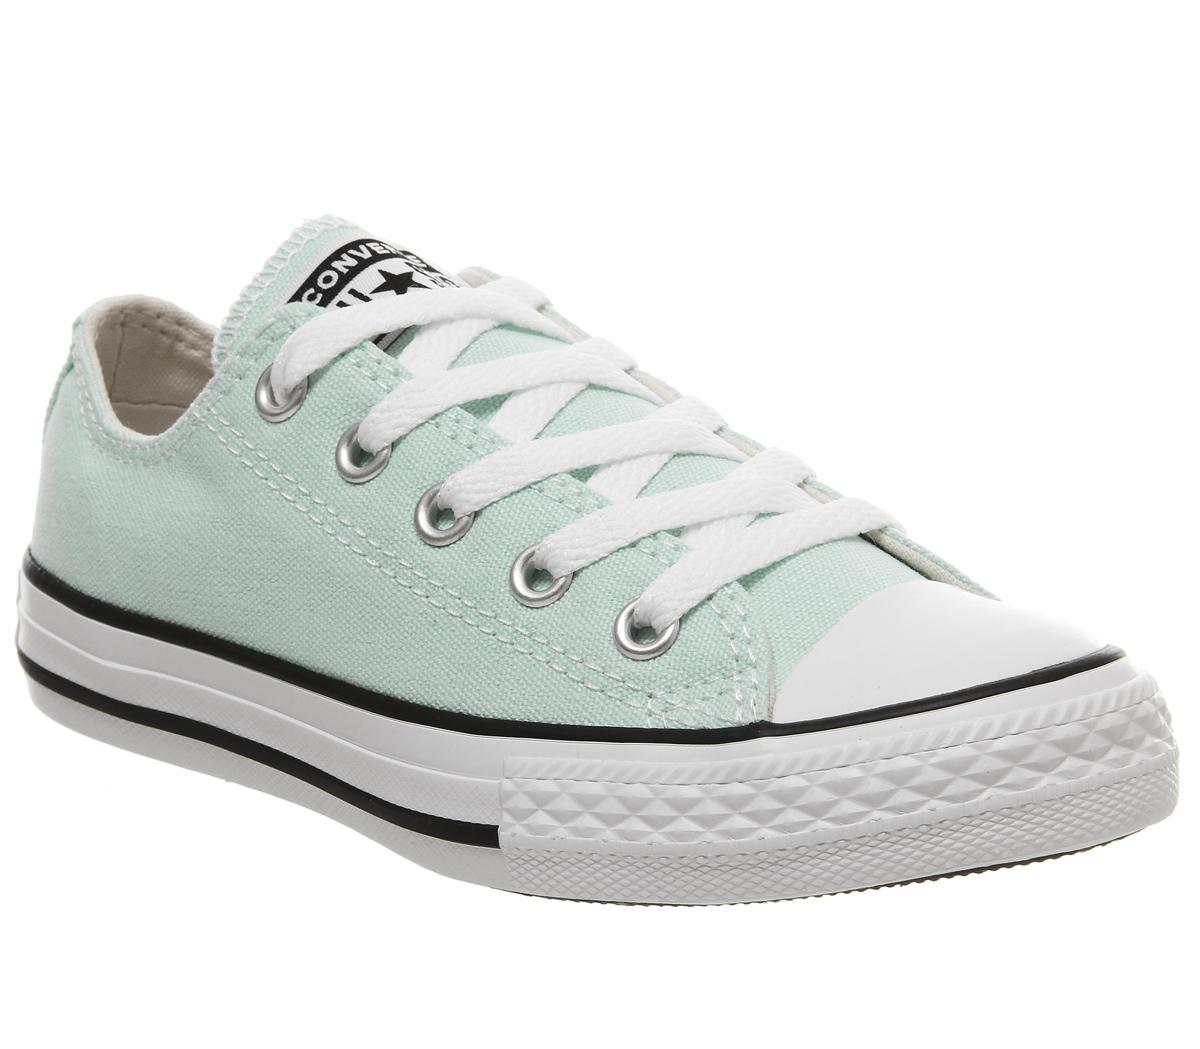 ConverseAll Star Low Youth TrainersTeal Tint White